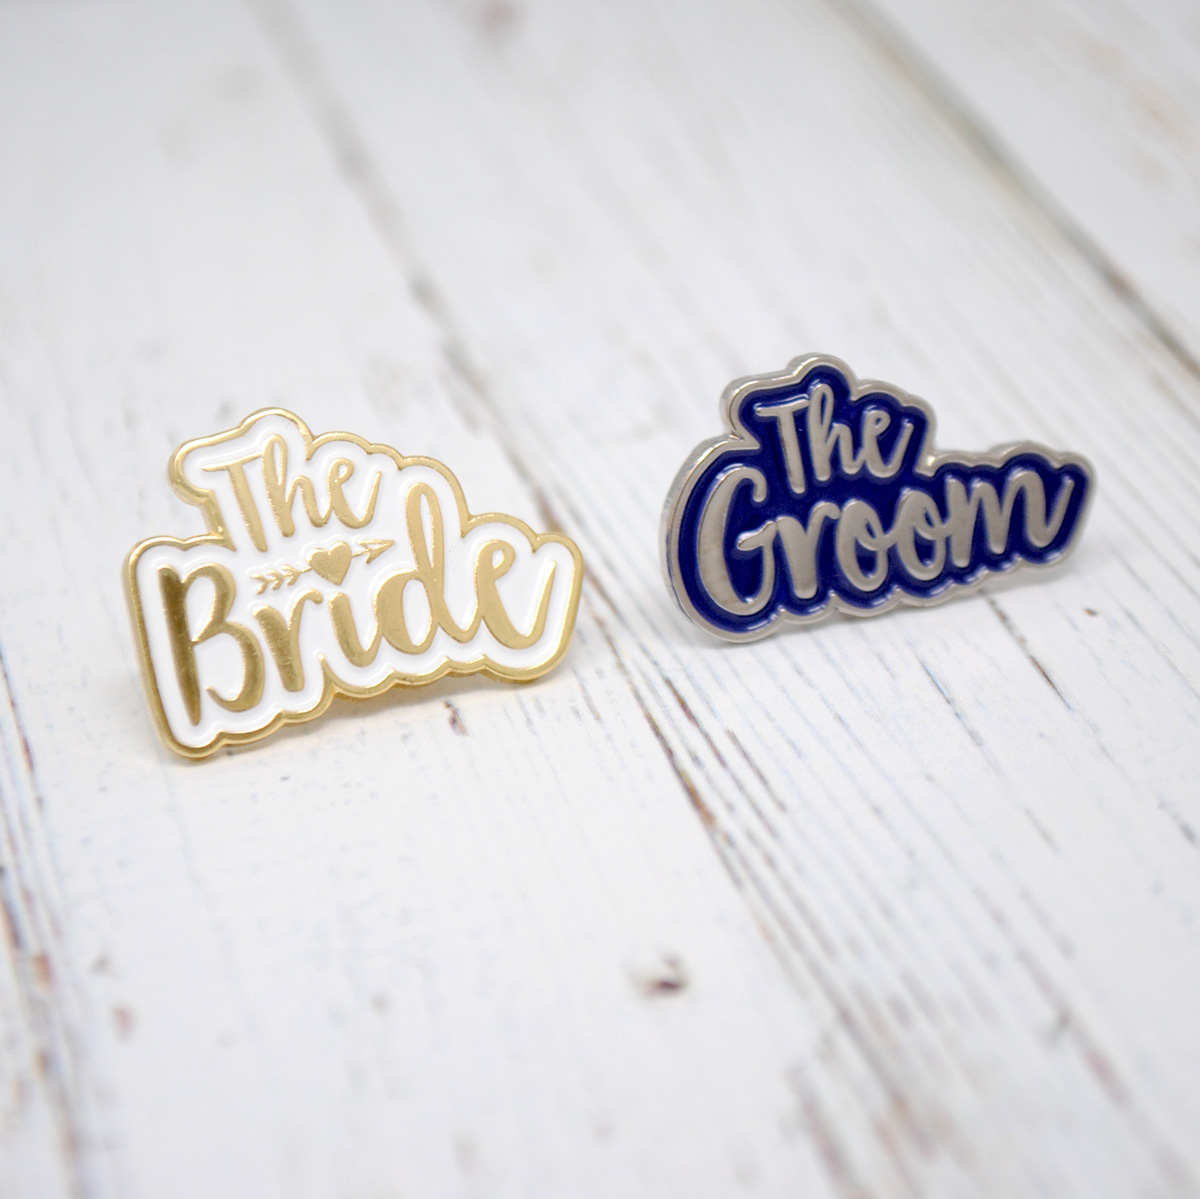 the bride and groom wedding hens stag badges